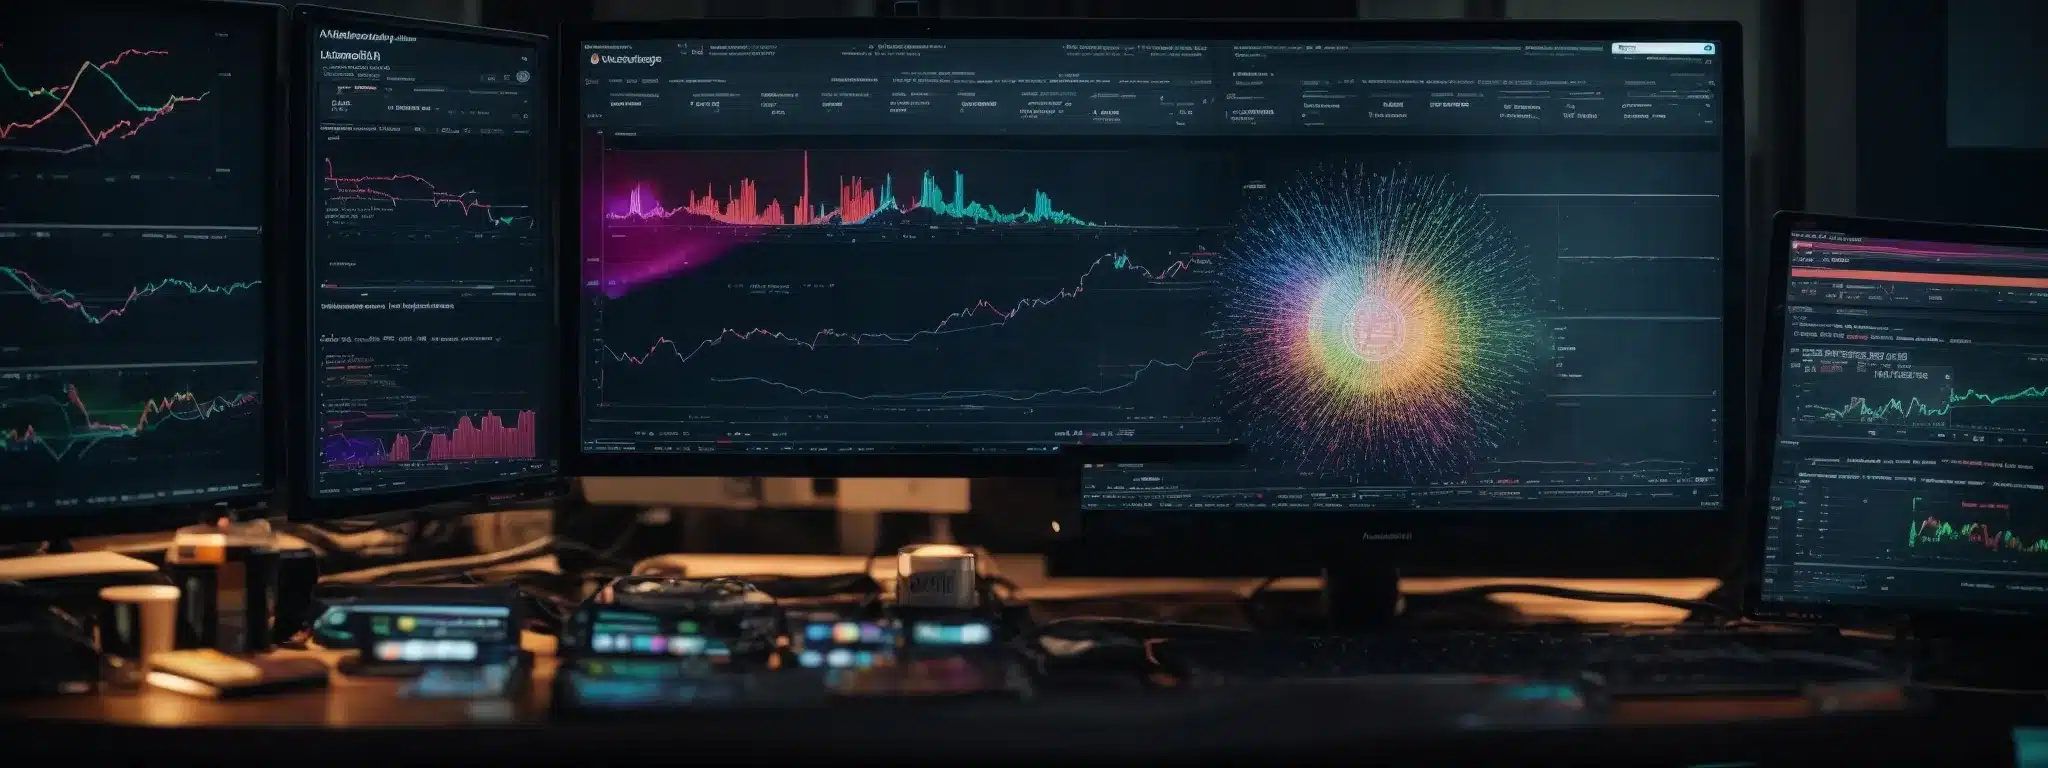 A Vibrant Computer Screen Shows A Live Analytics Dashboard Tracking Website Traffic And Engagement Metrics, Illuminating The Marketer'S Face With The Success Of His Sem Strategies.